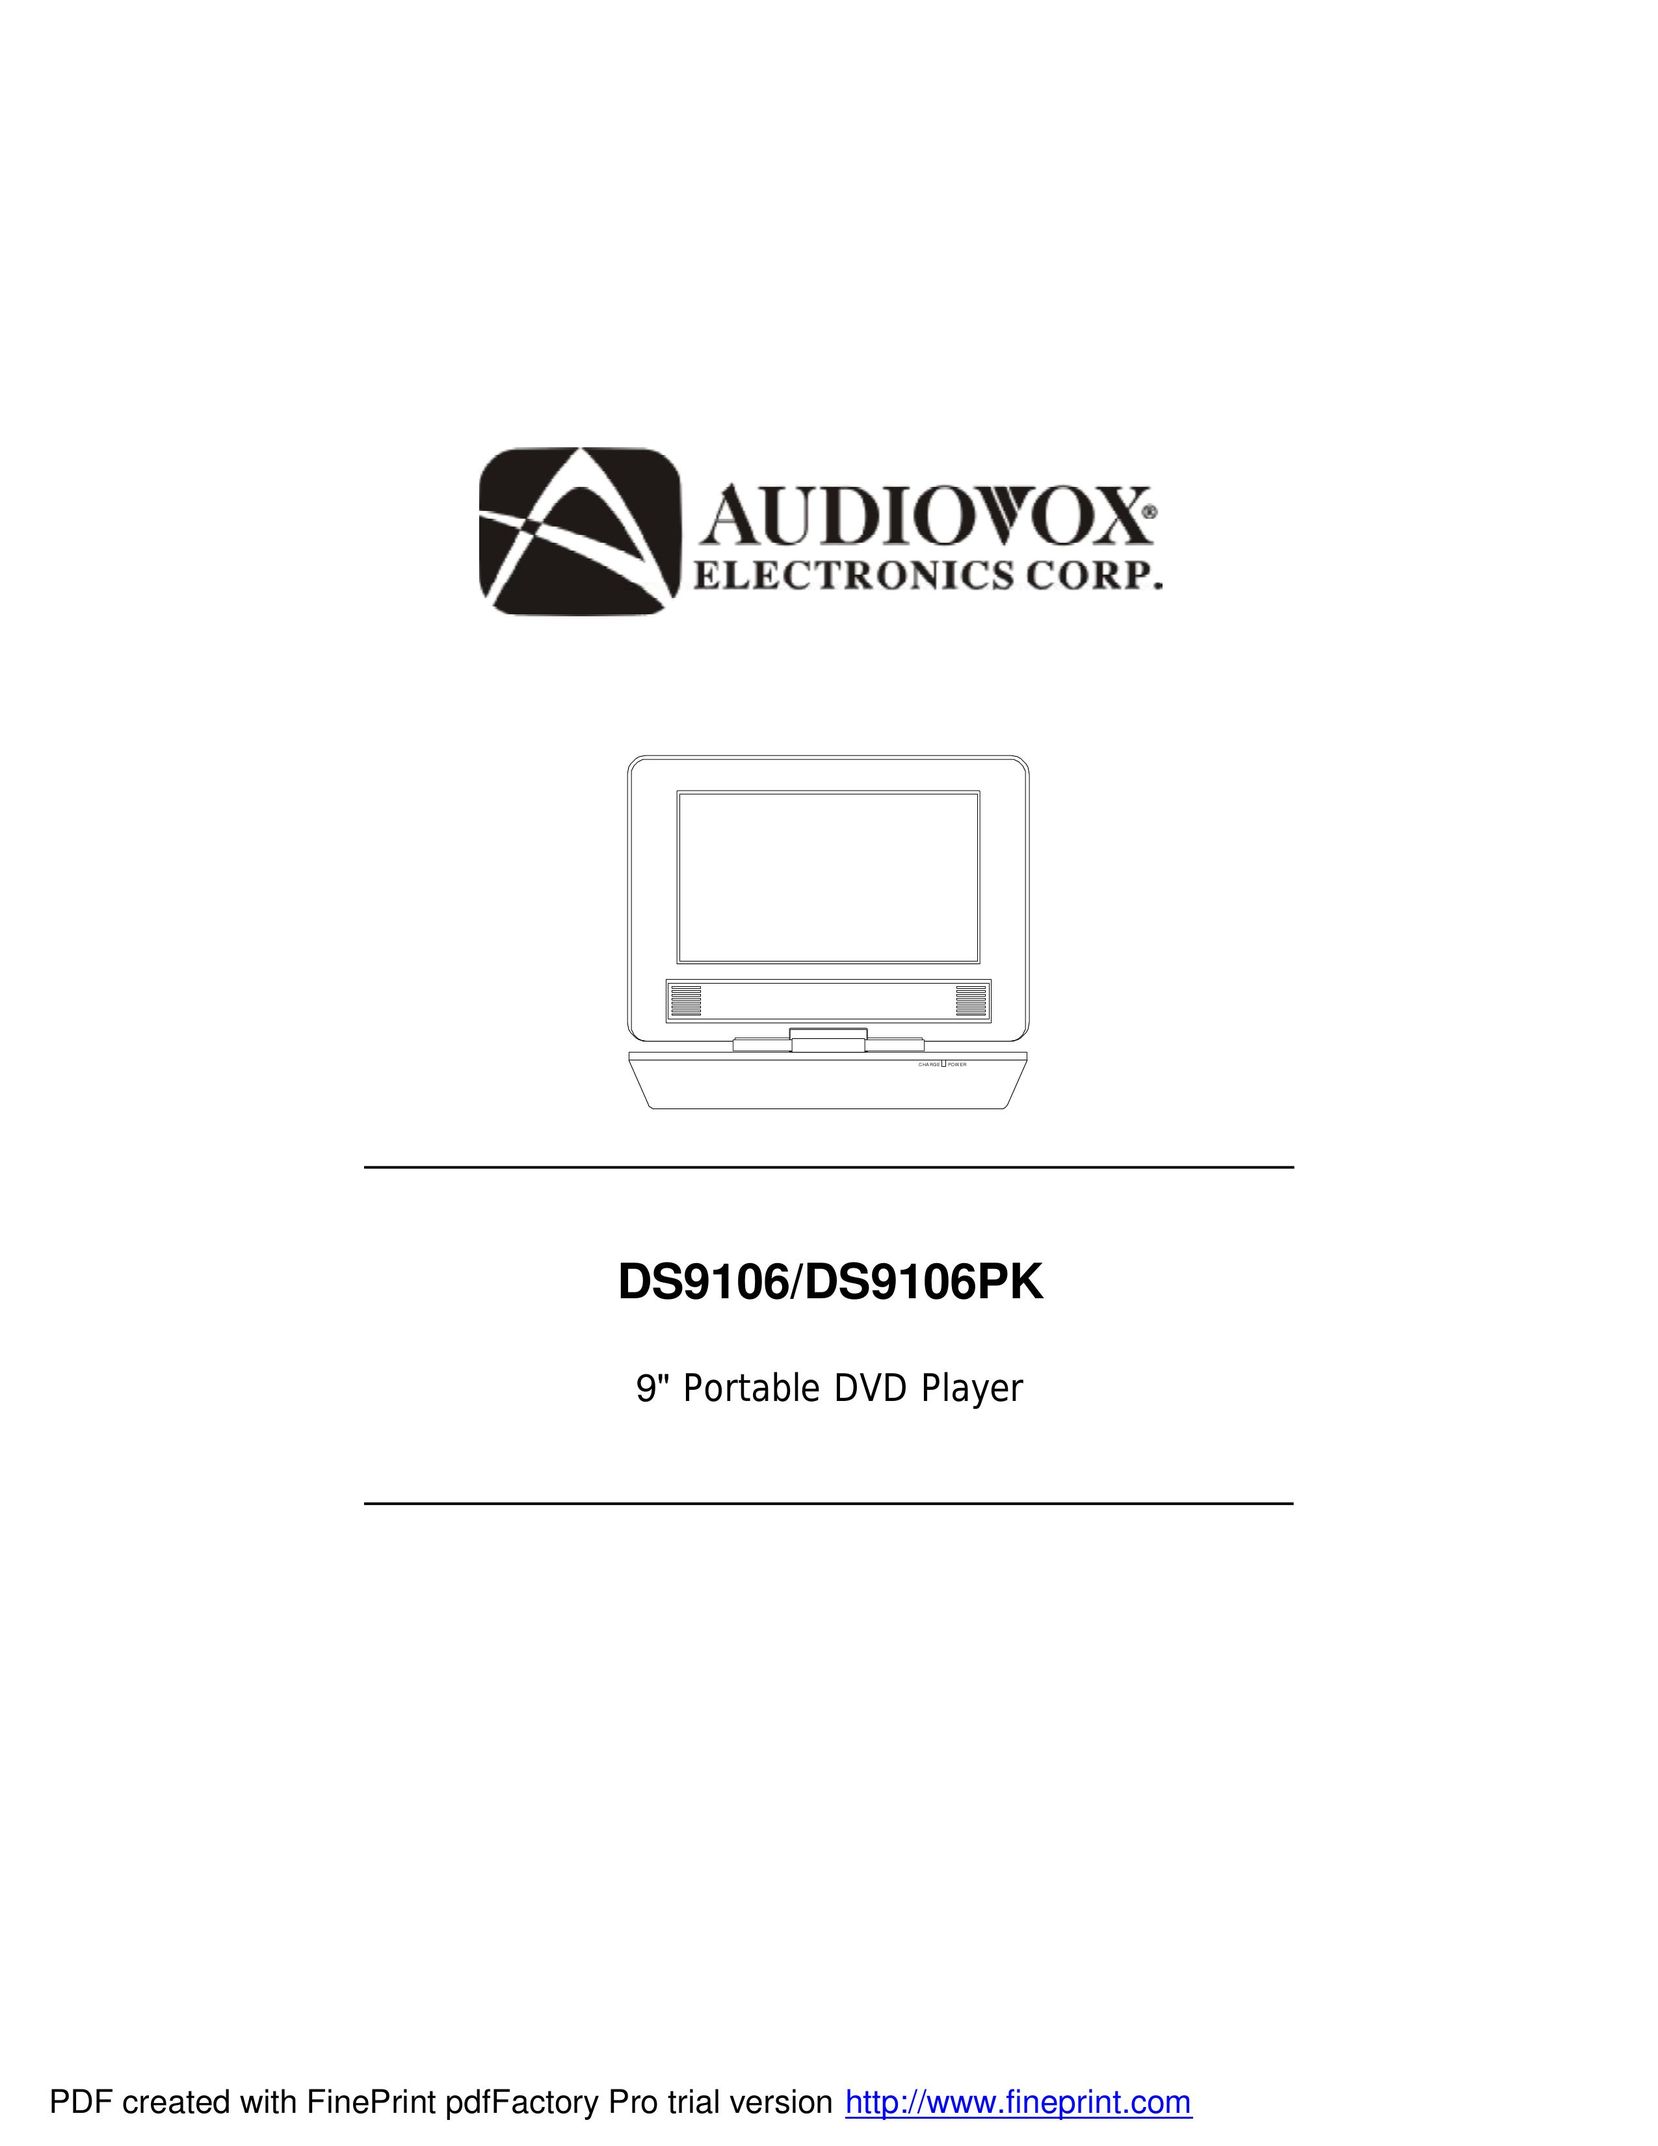 Audiovox DS9106PK Portable DVD Player User Manual